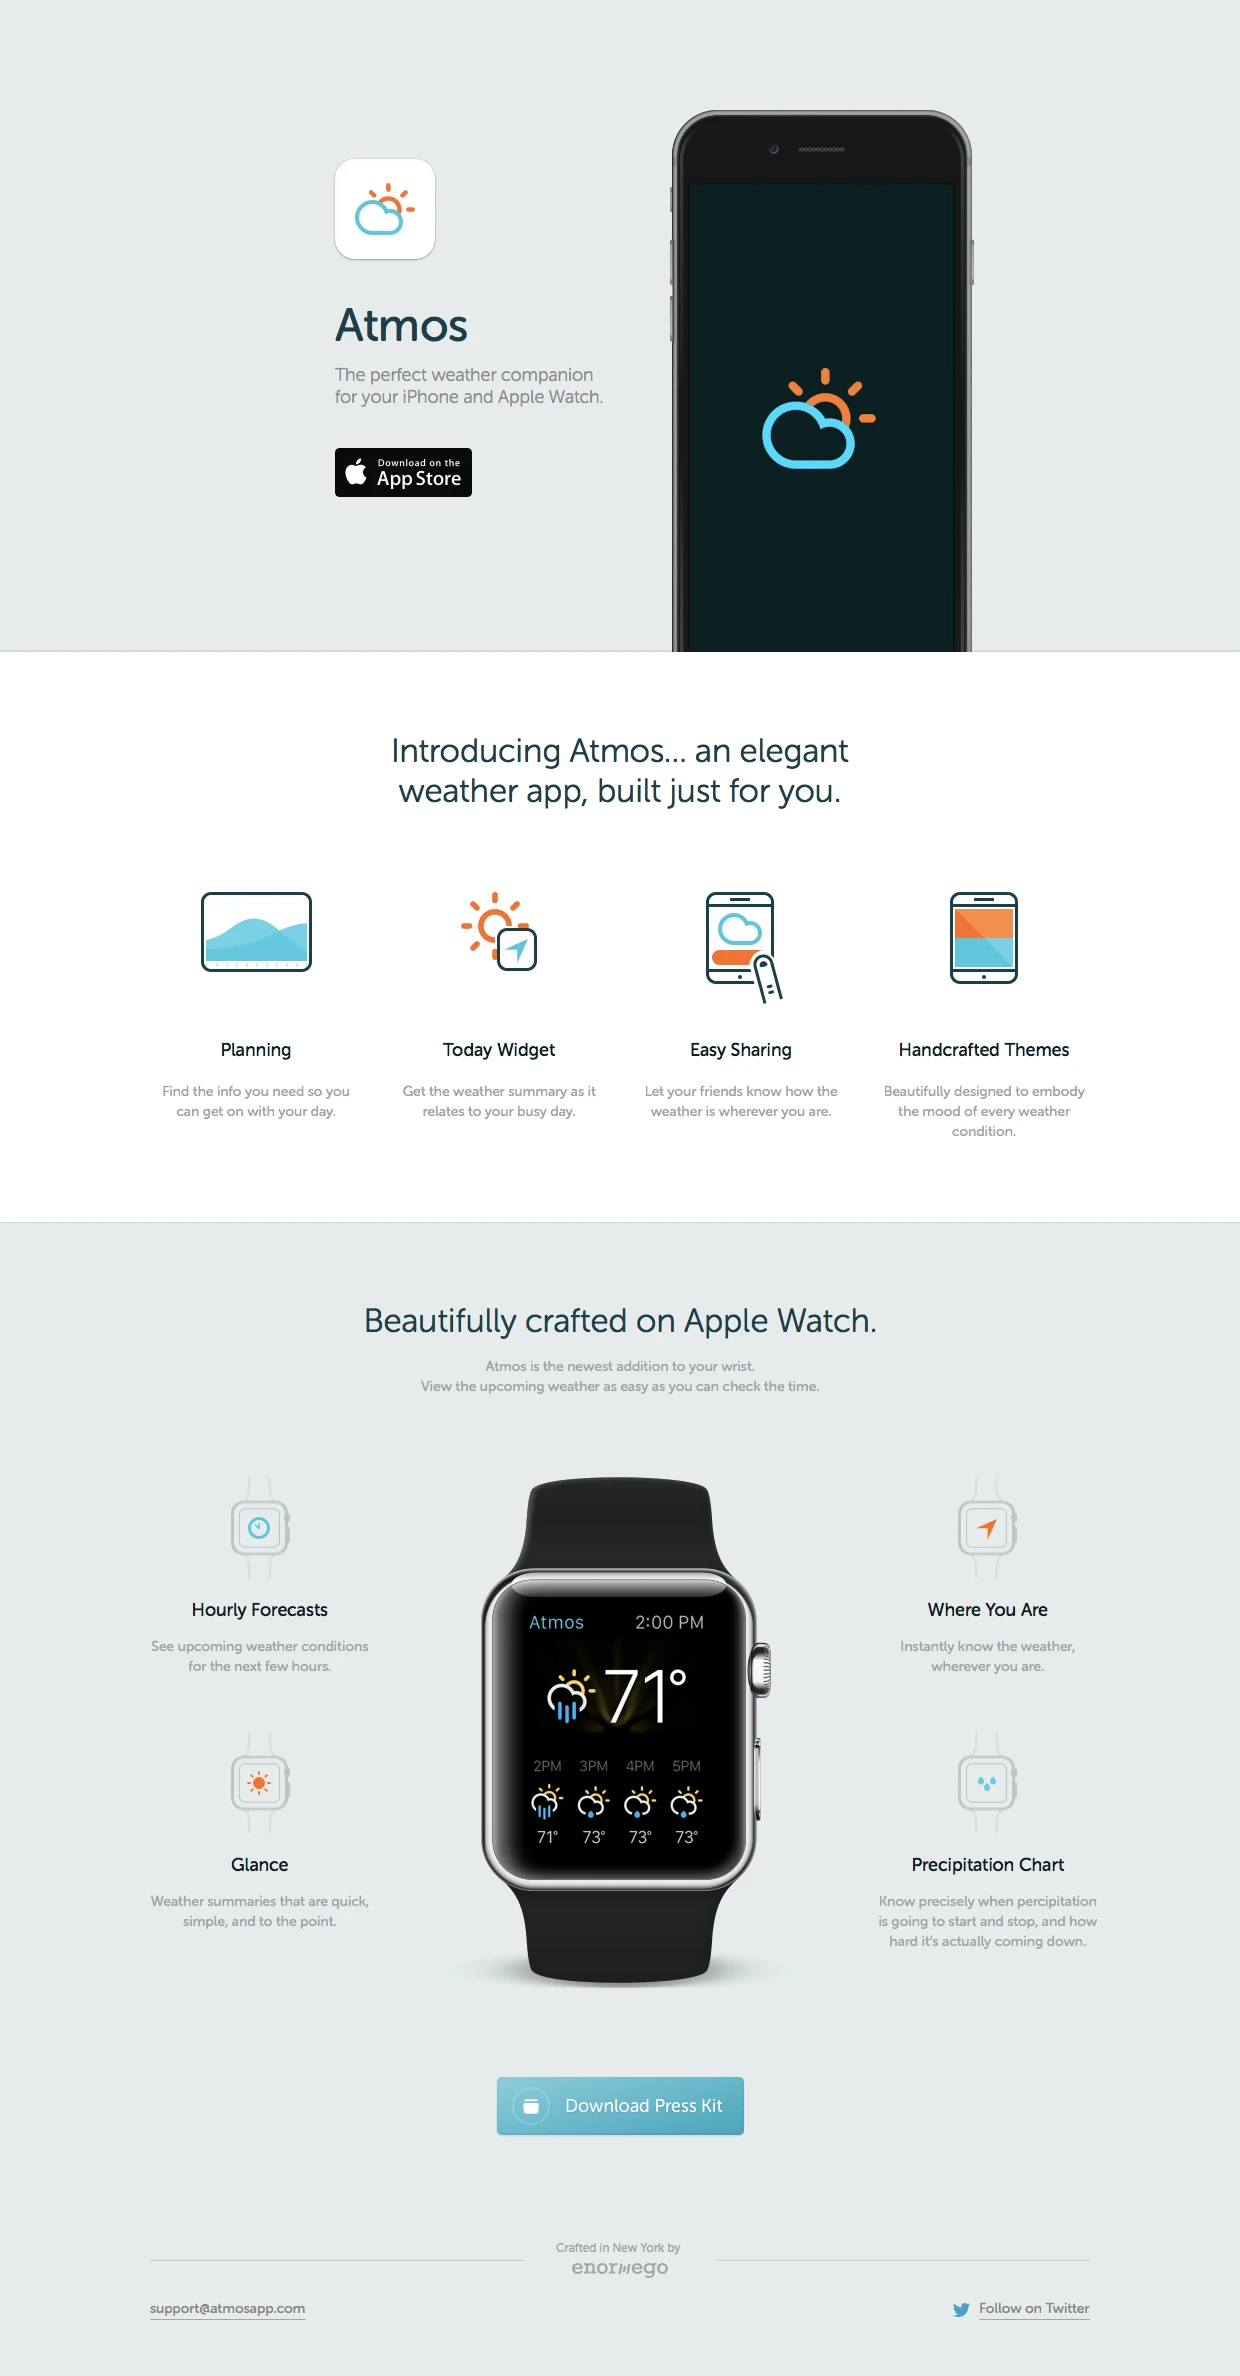 Atmos Landing Page Example: Atmos is an easy to use and stunningly beautiful weather app for your iPhone and Apple Watch. Atmos has been carefully crafted to bring the most vital weather data to you in the most user friendly way possible so you can get what you need and get on with your day. 